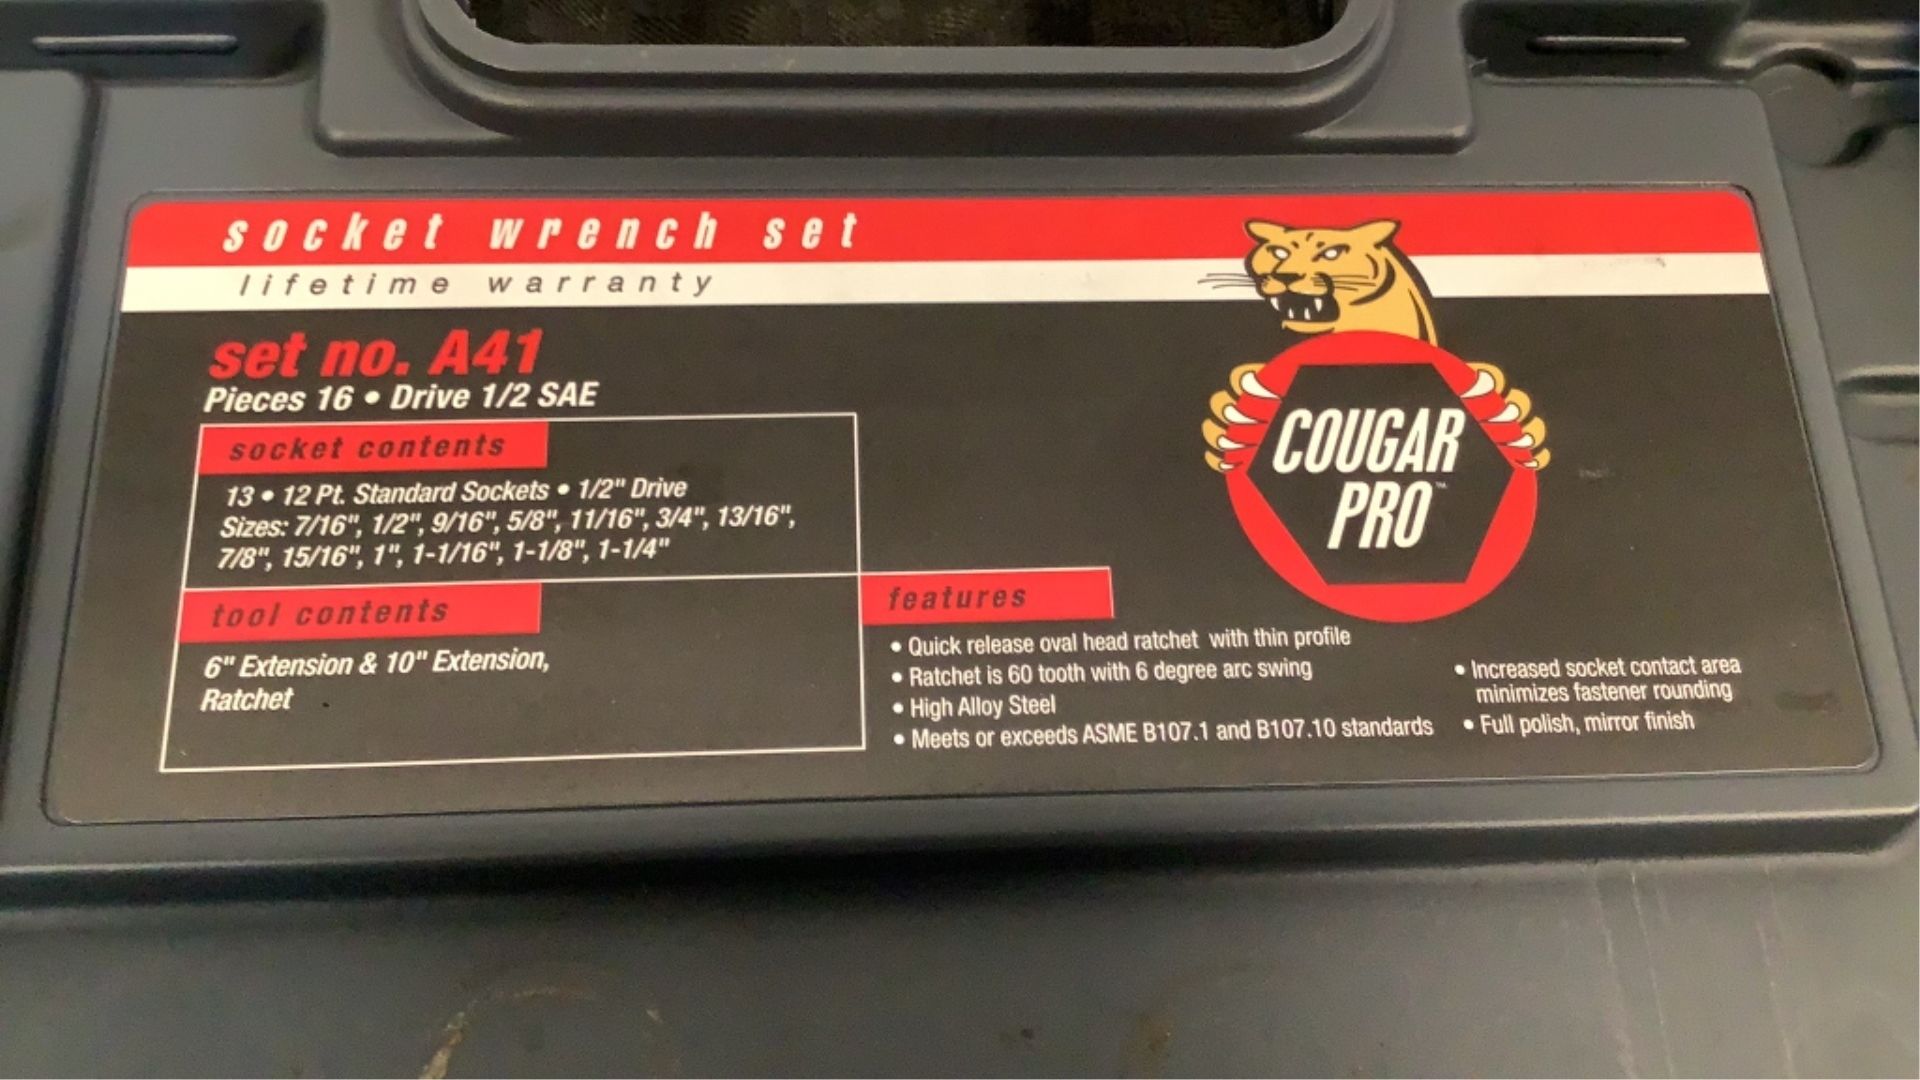 Cougar Pro 16 Piece Socket Wrench Set A41 - Image 2 of 10